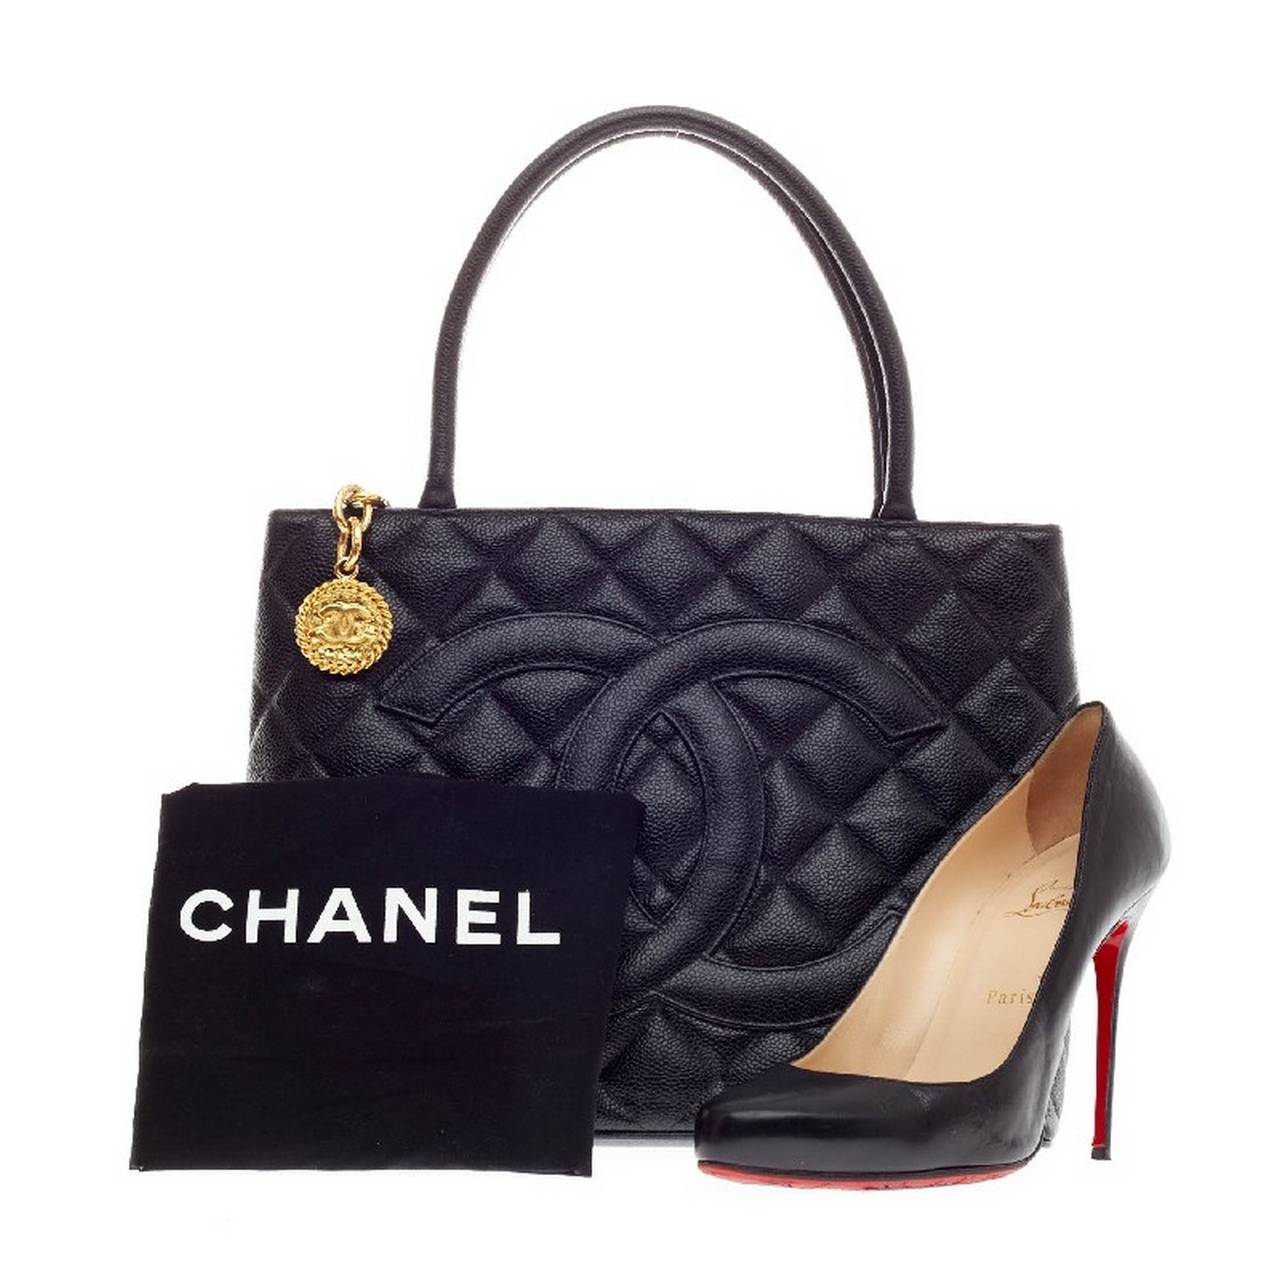 This authentic Chanel Medallion Tote Caviar in Medium is an iconic tote in a versatile sleek style that will compliment a multitude of looks. Crafted from black caviar leather with diamond quilt stitching, this tote features a zip closure, oversized